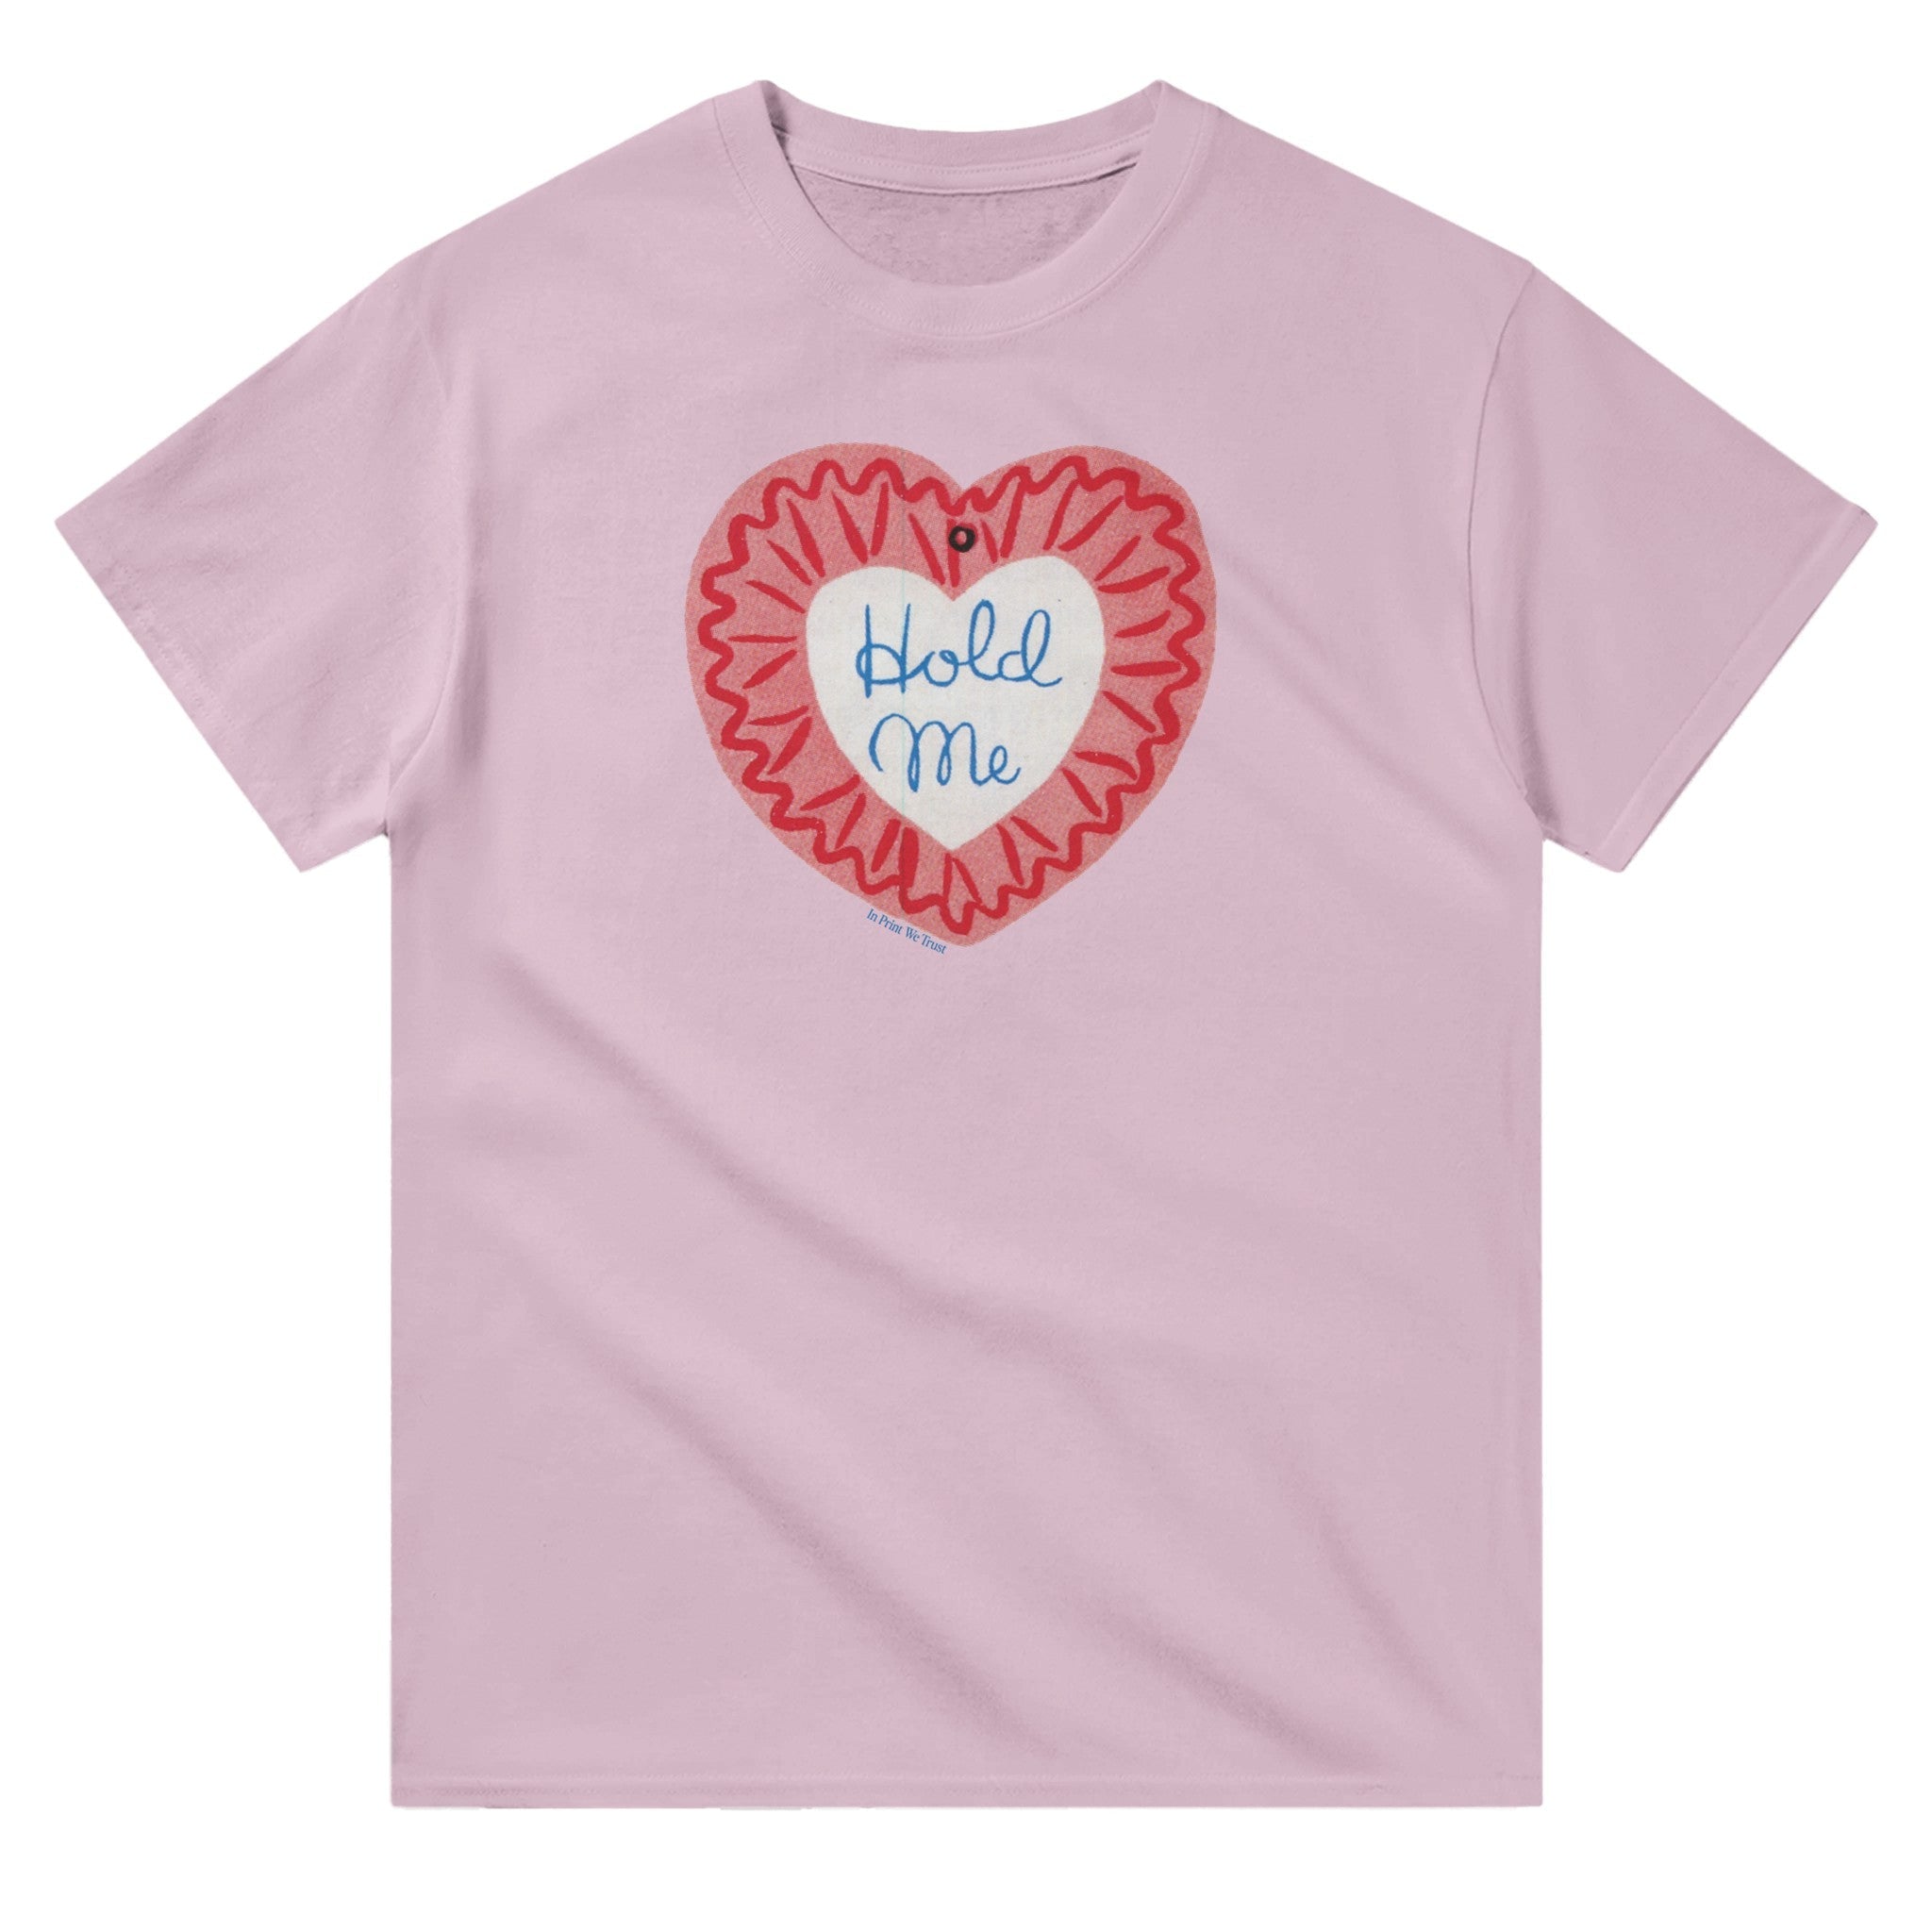 'Hold Me' classic tee - In Print We Trust